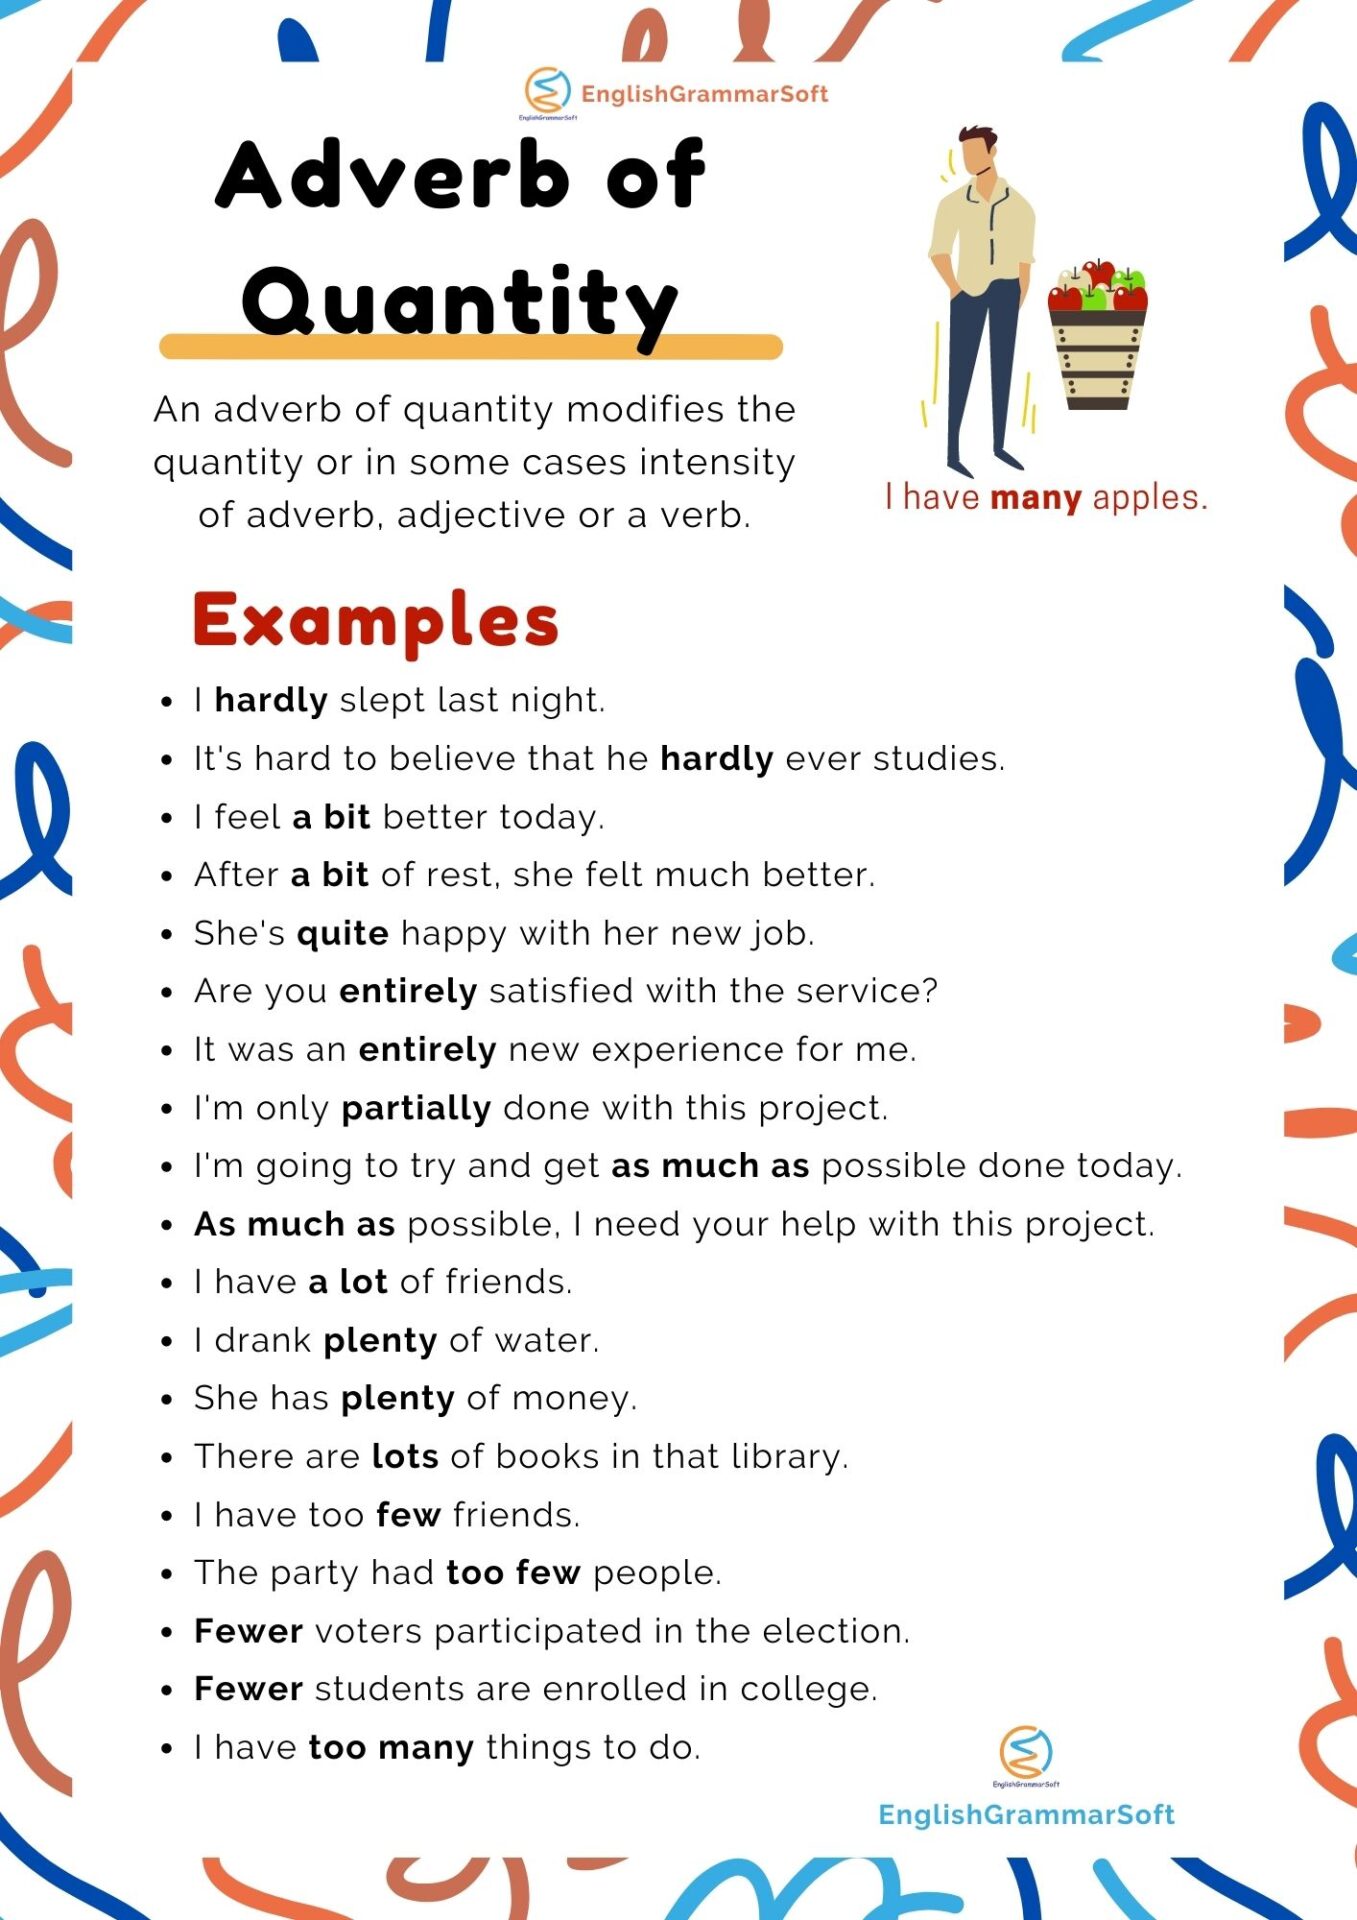 Adverb of Quantity Examples